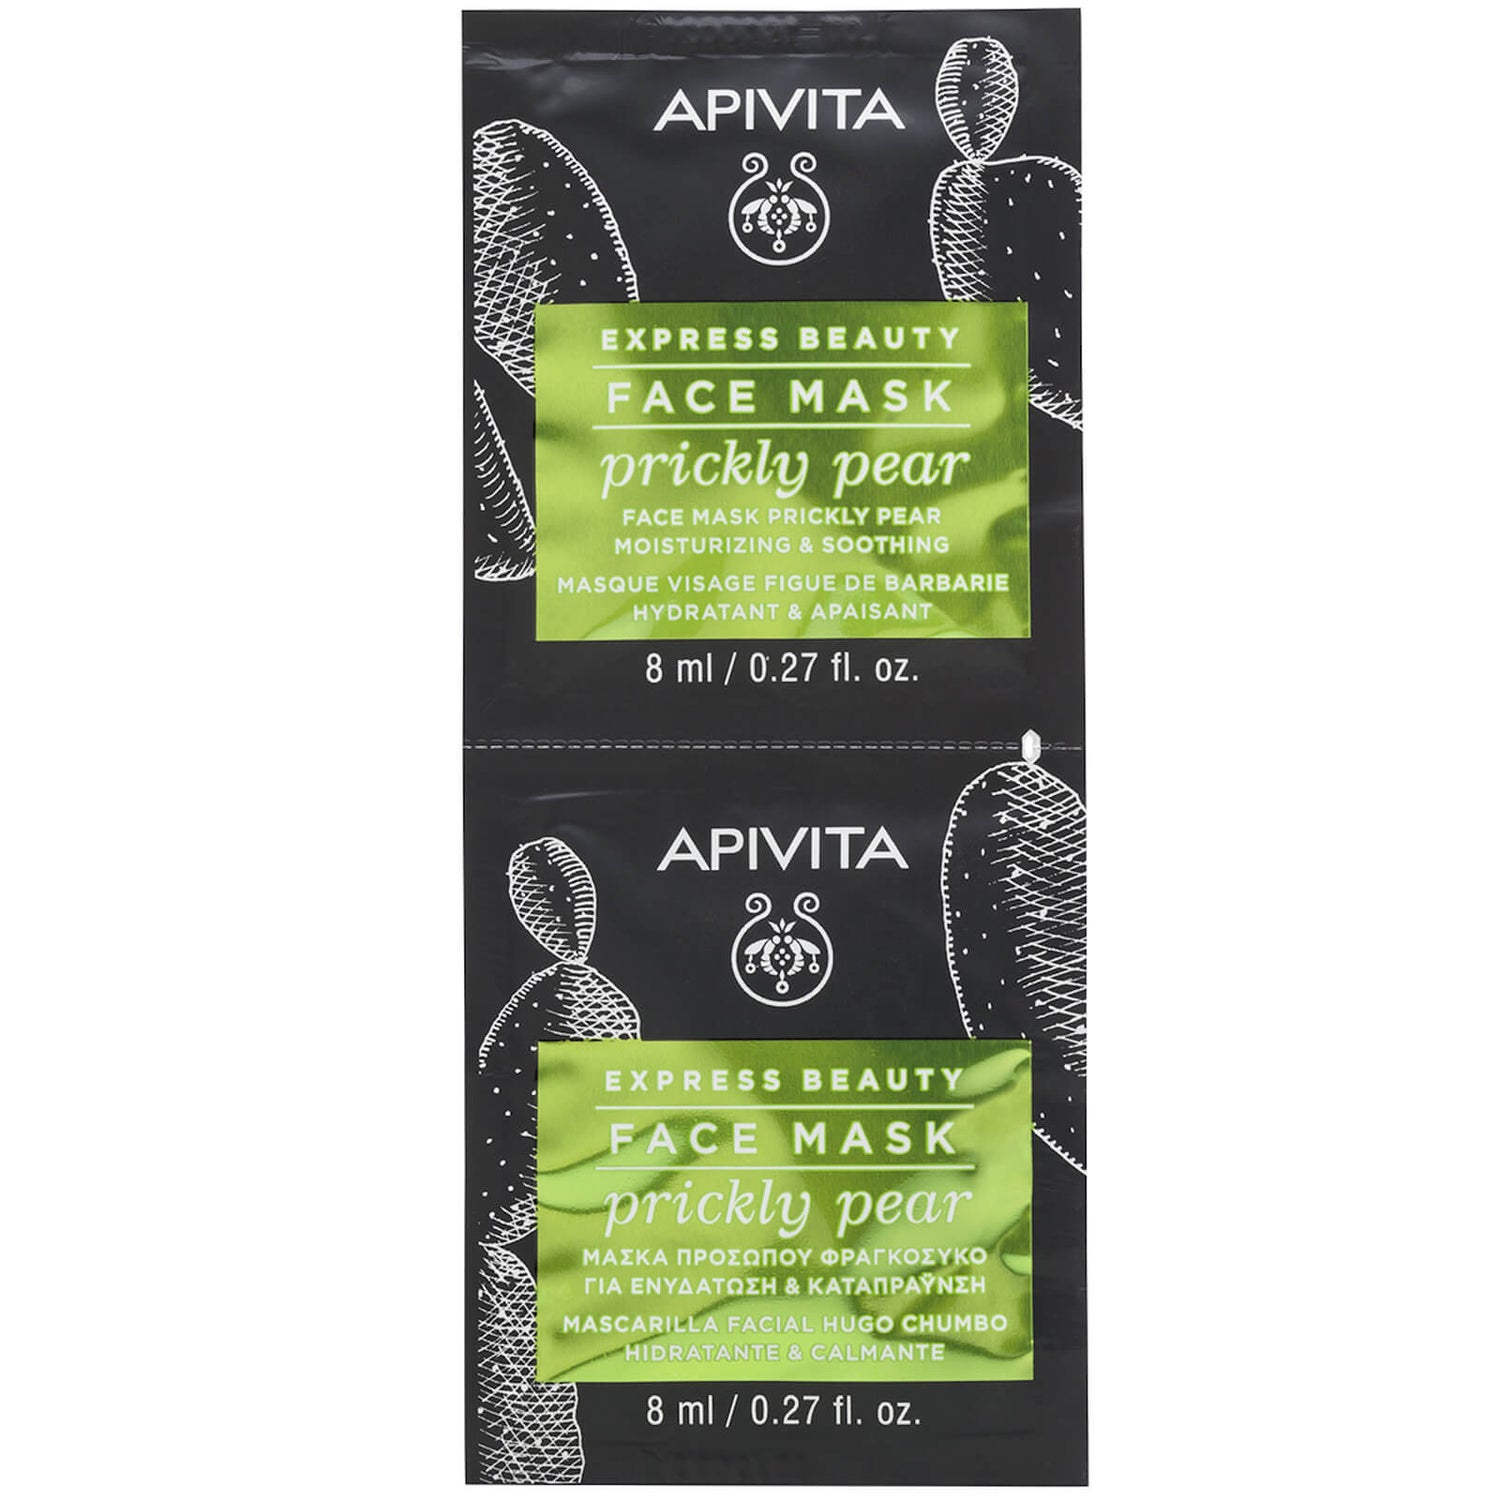 APIVITA Express Moisturizing & Soothing Face Mask – Prickly Pear 2 x 8 ml